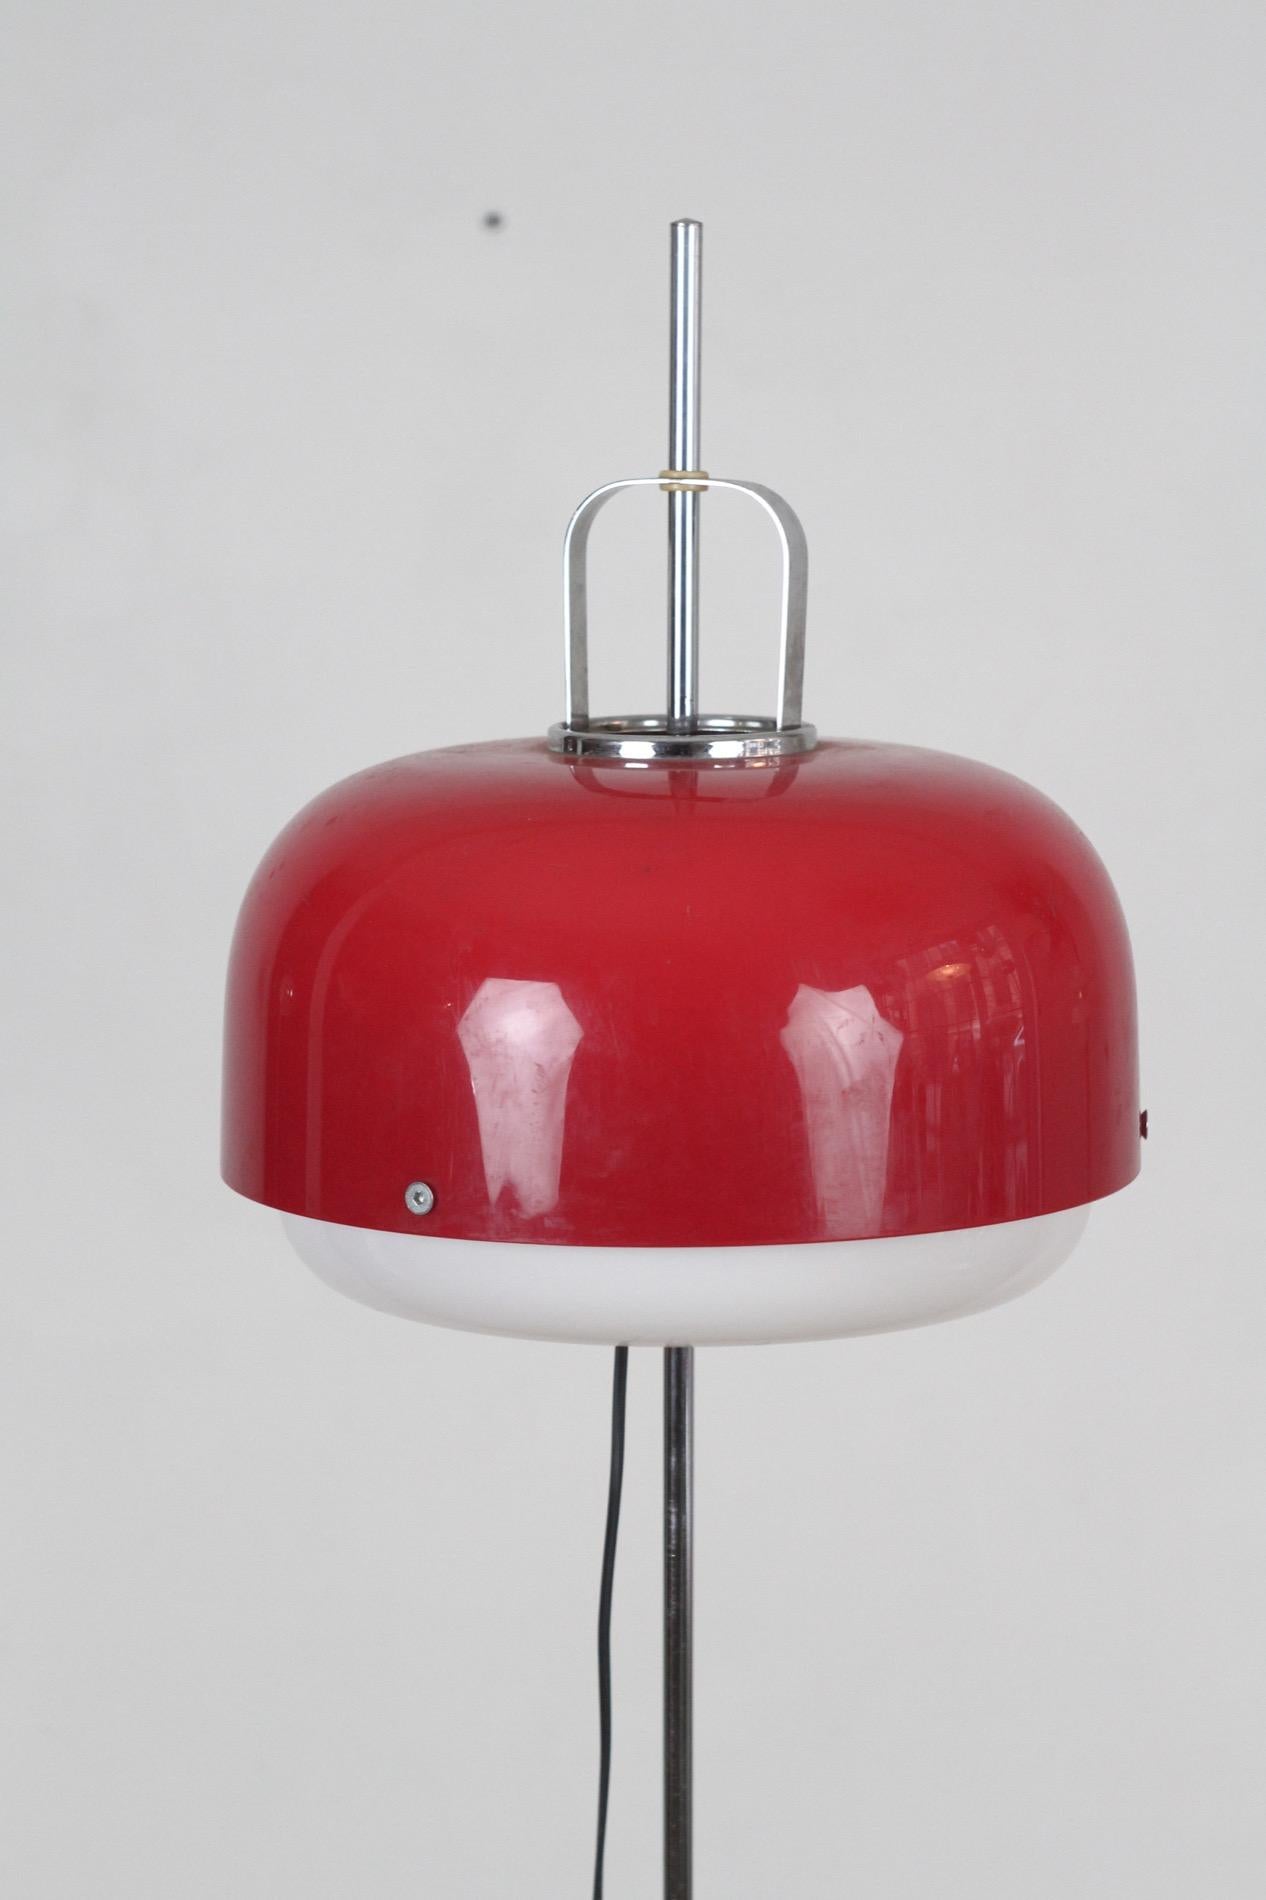 Amazing Space Age floor lamp designed by Harvey Guzzini in the 1970s, produced and labelled by Meblo. It is very rare to have the original white inner shade as well. Chrome parts are in nice condition, the base has got a minor fading.